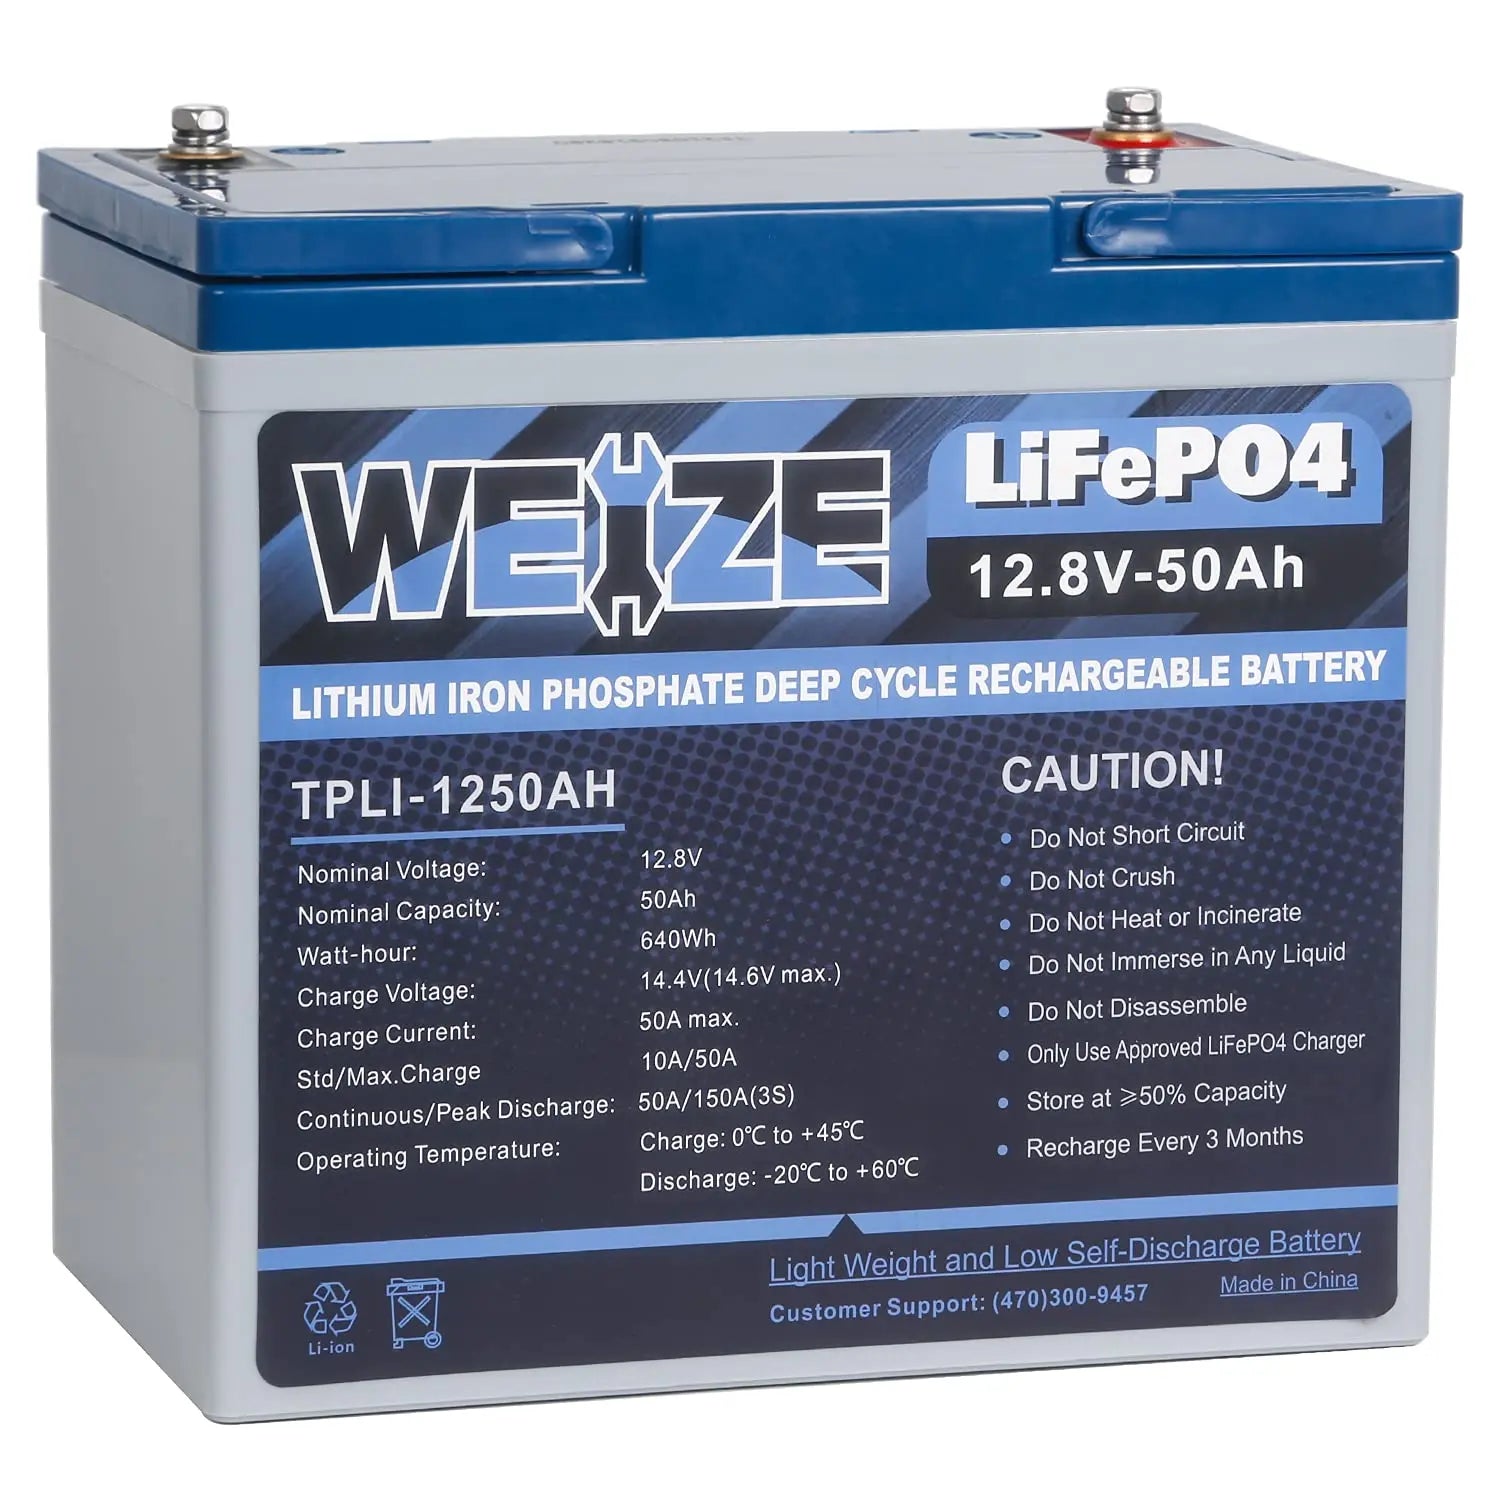 WEIZE LiFePO4 Lithium Battery 12V 100Ah丨BMS 8000+ Deep Cycles